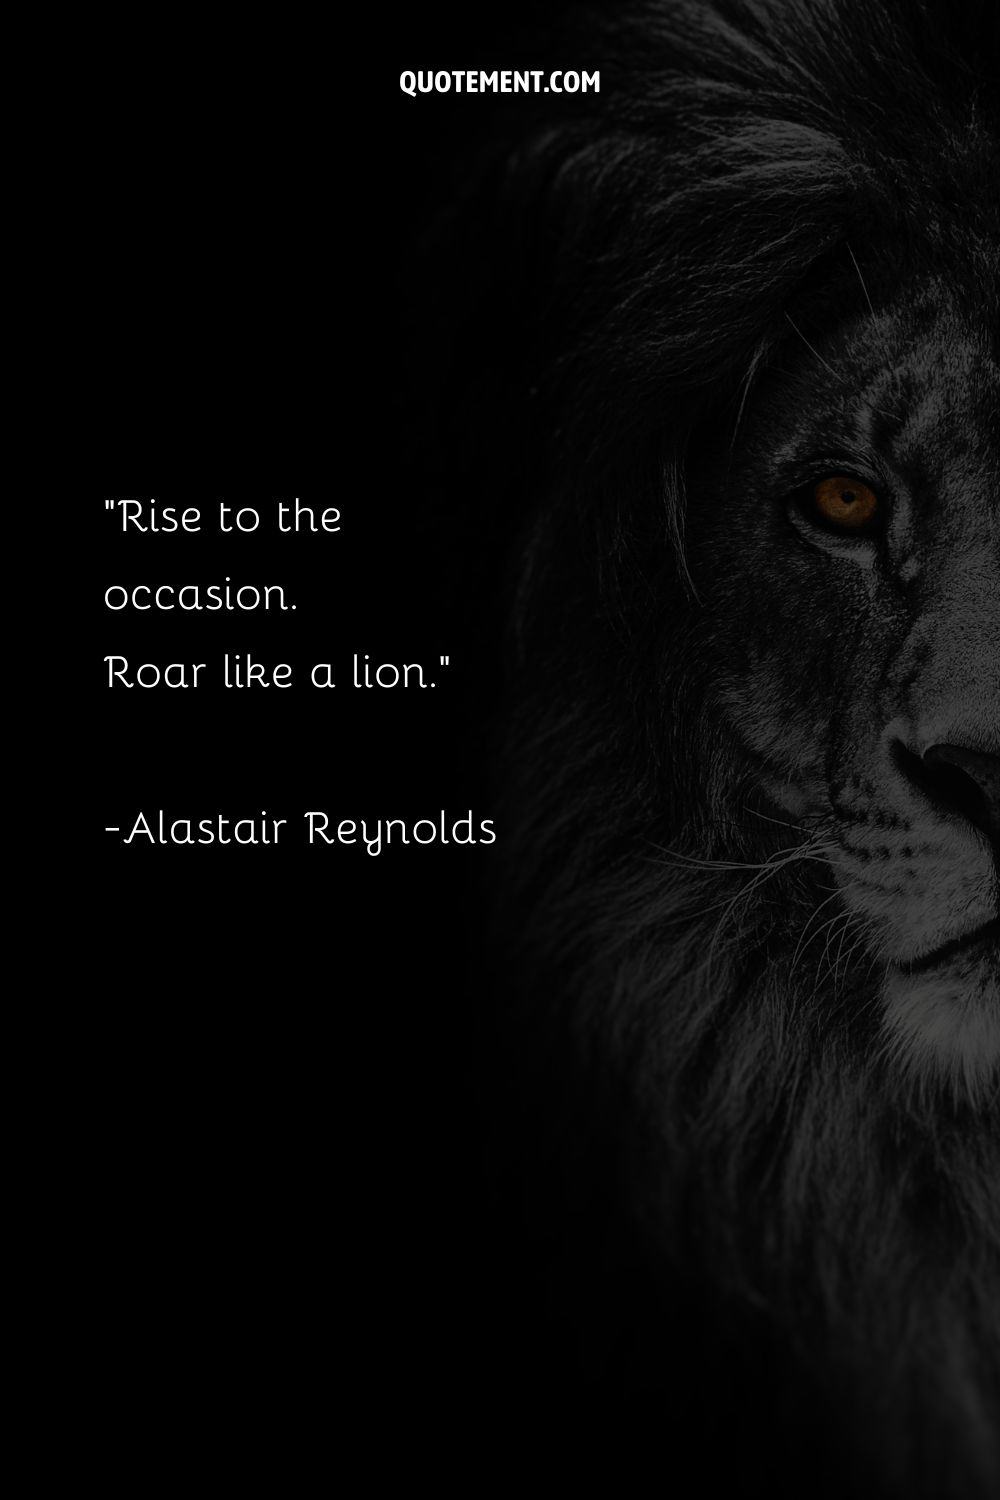 Rise to the occasion. Roar like a lion